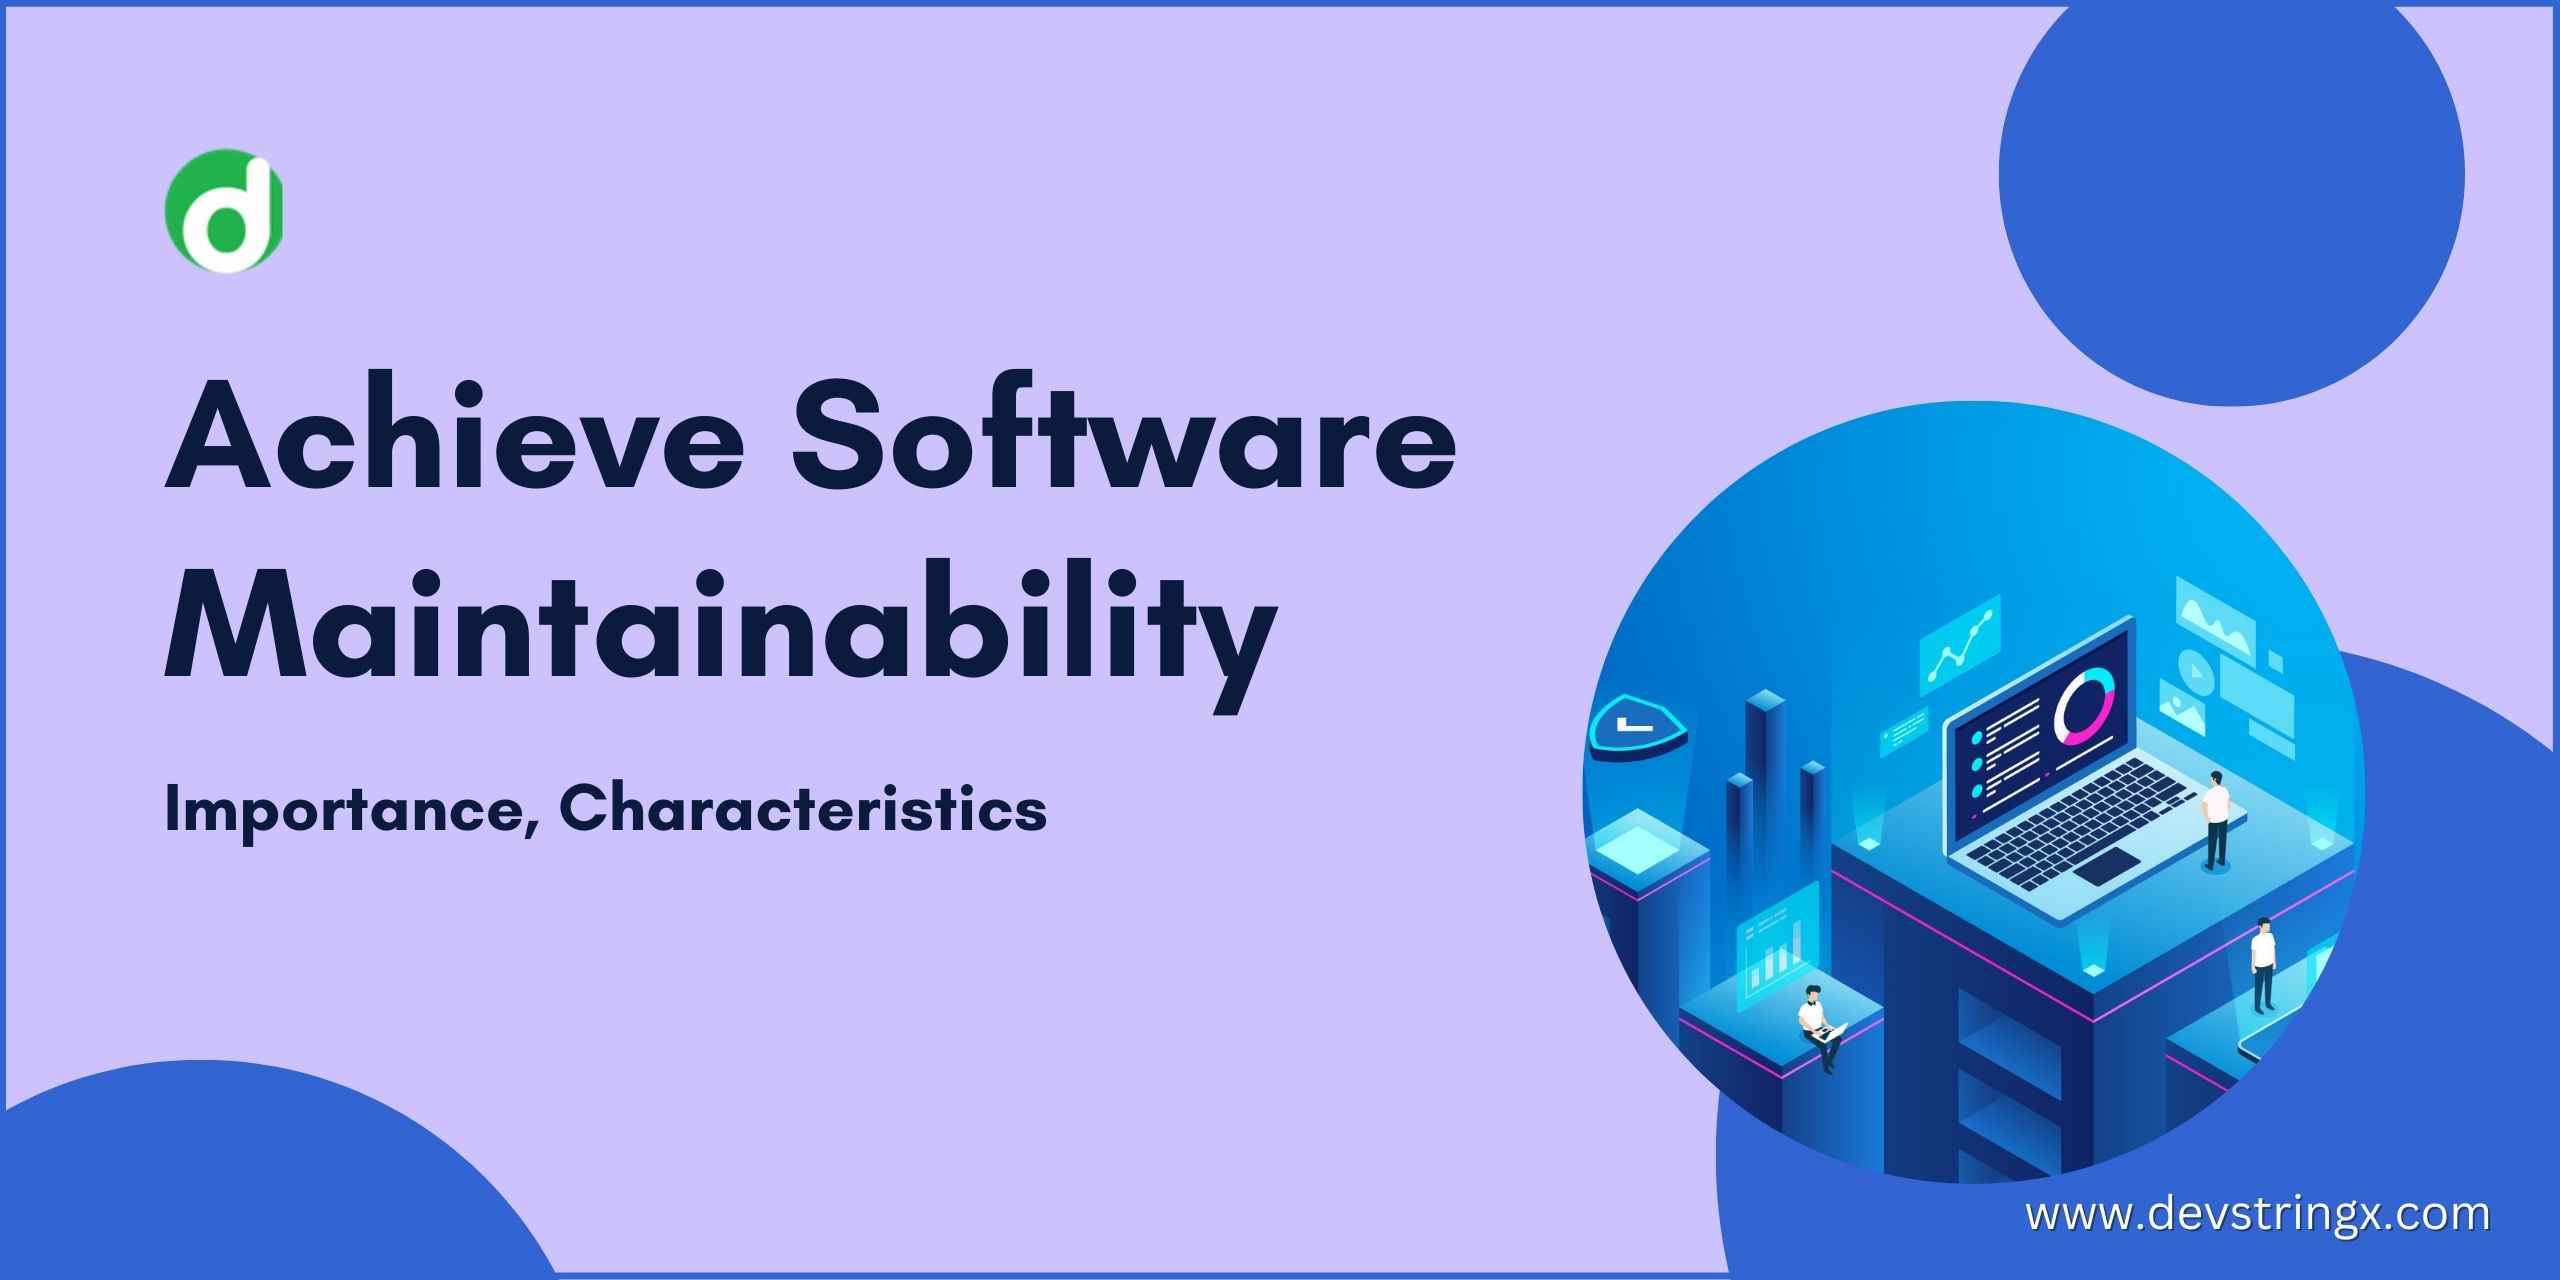 Feature image for achieve software maintainability